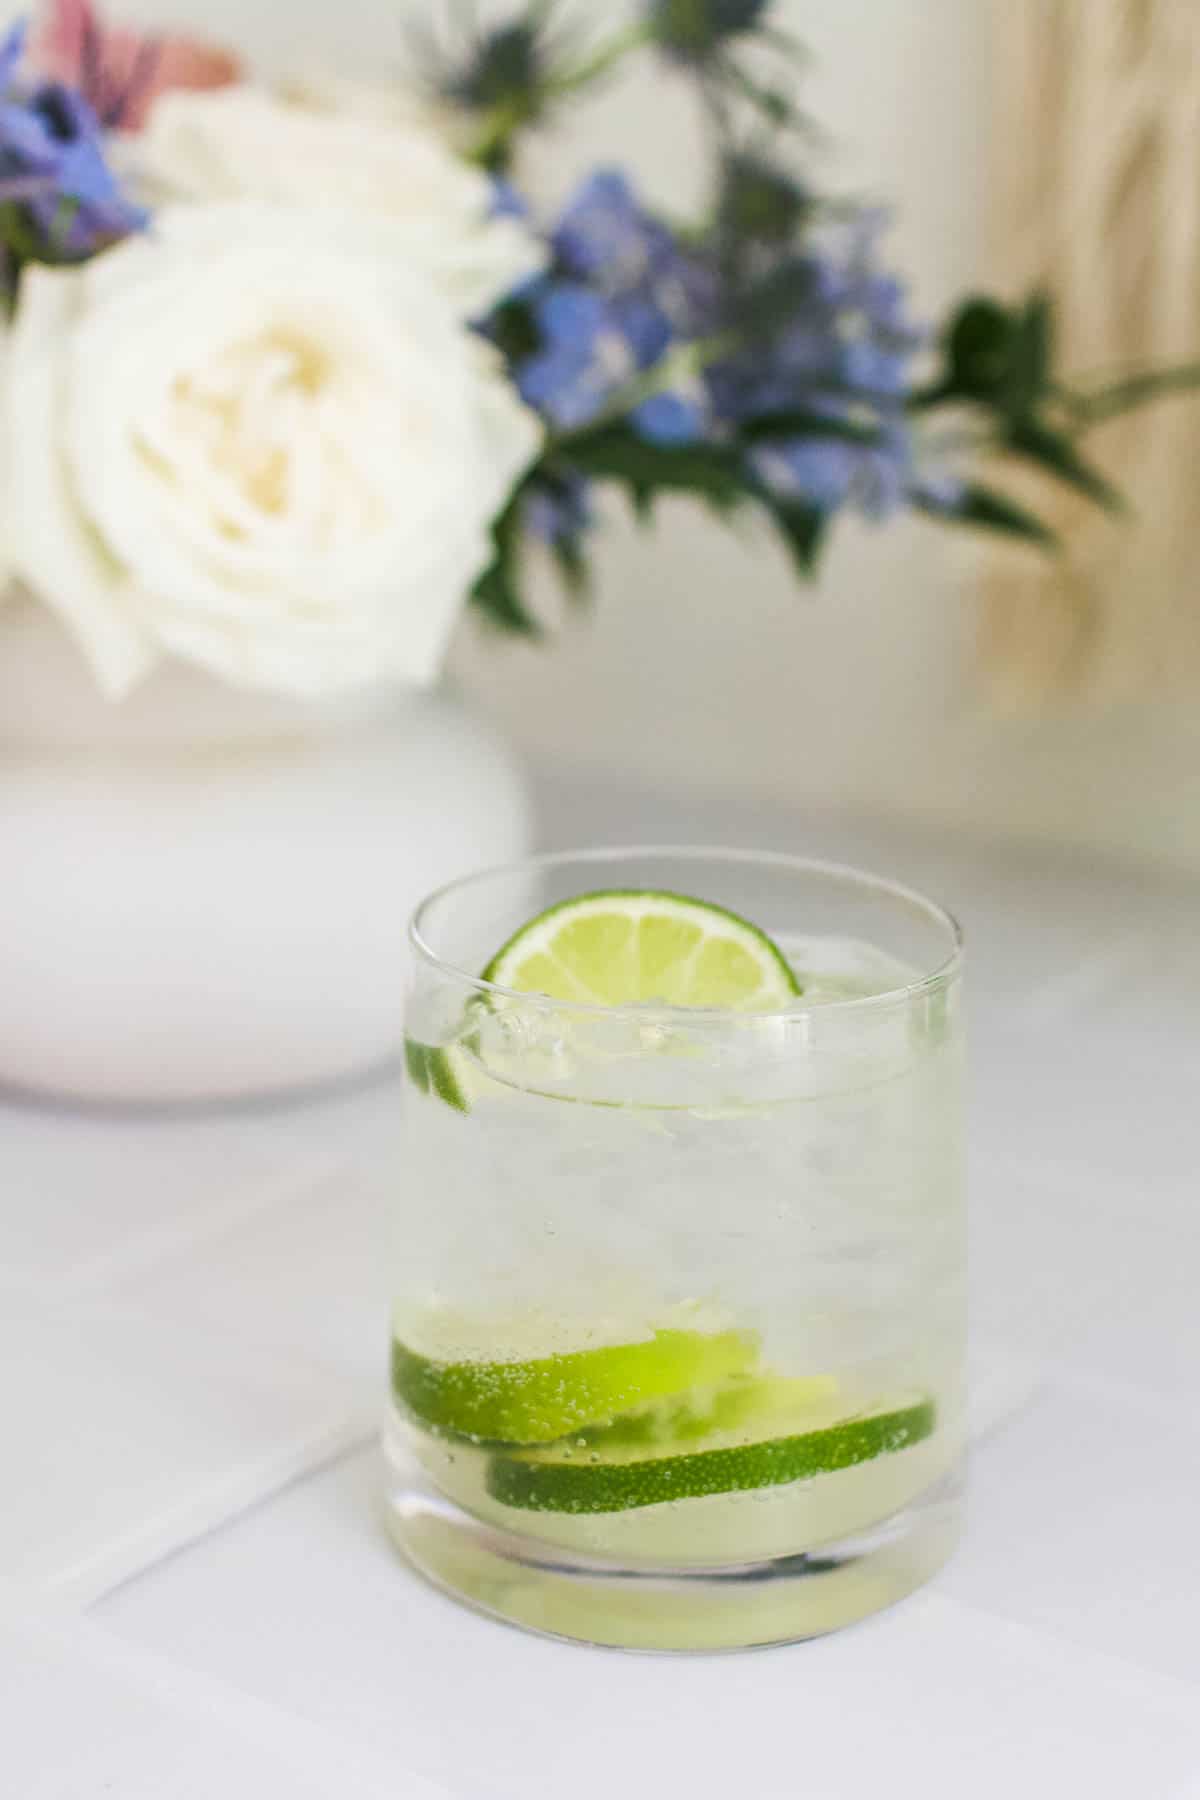 Gin and tonic garnished with lime with a vase of flowers in the background.